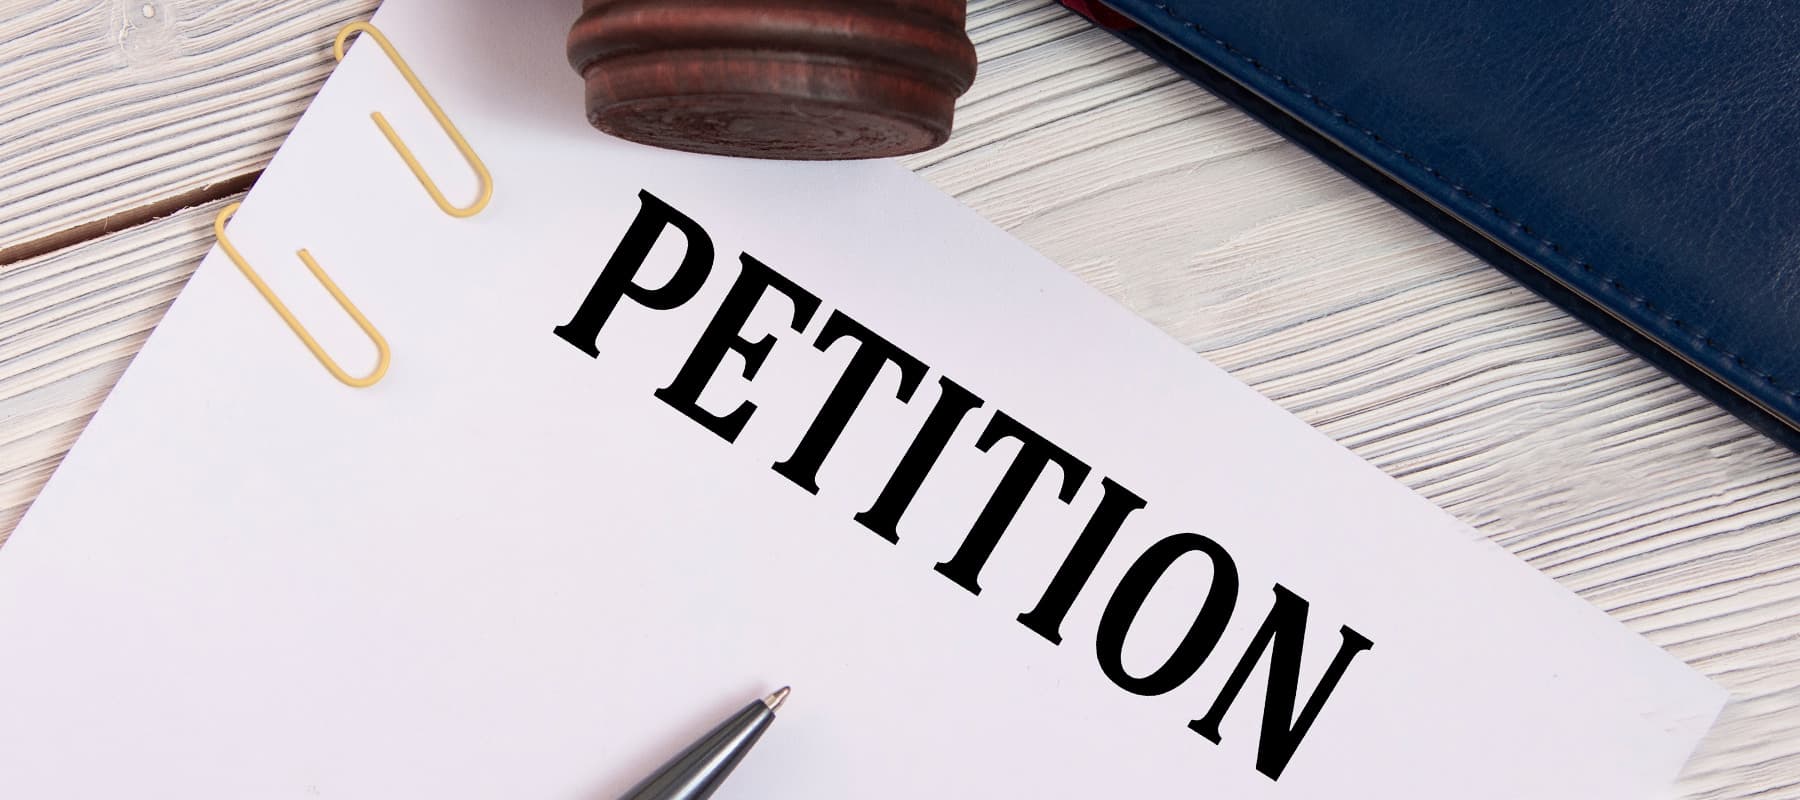 Probate Petitions for Wills